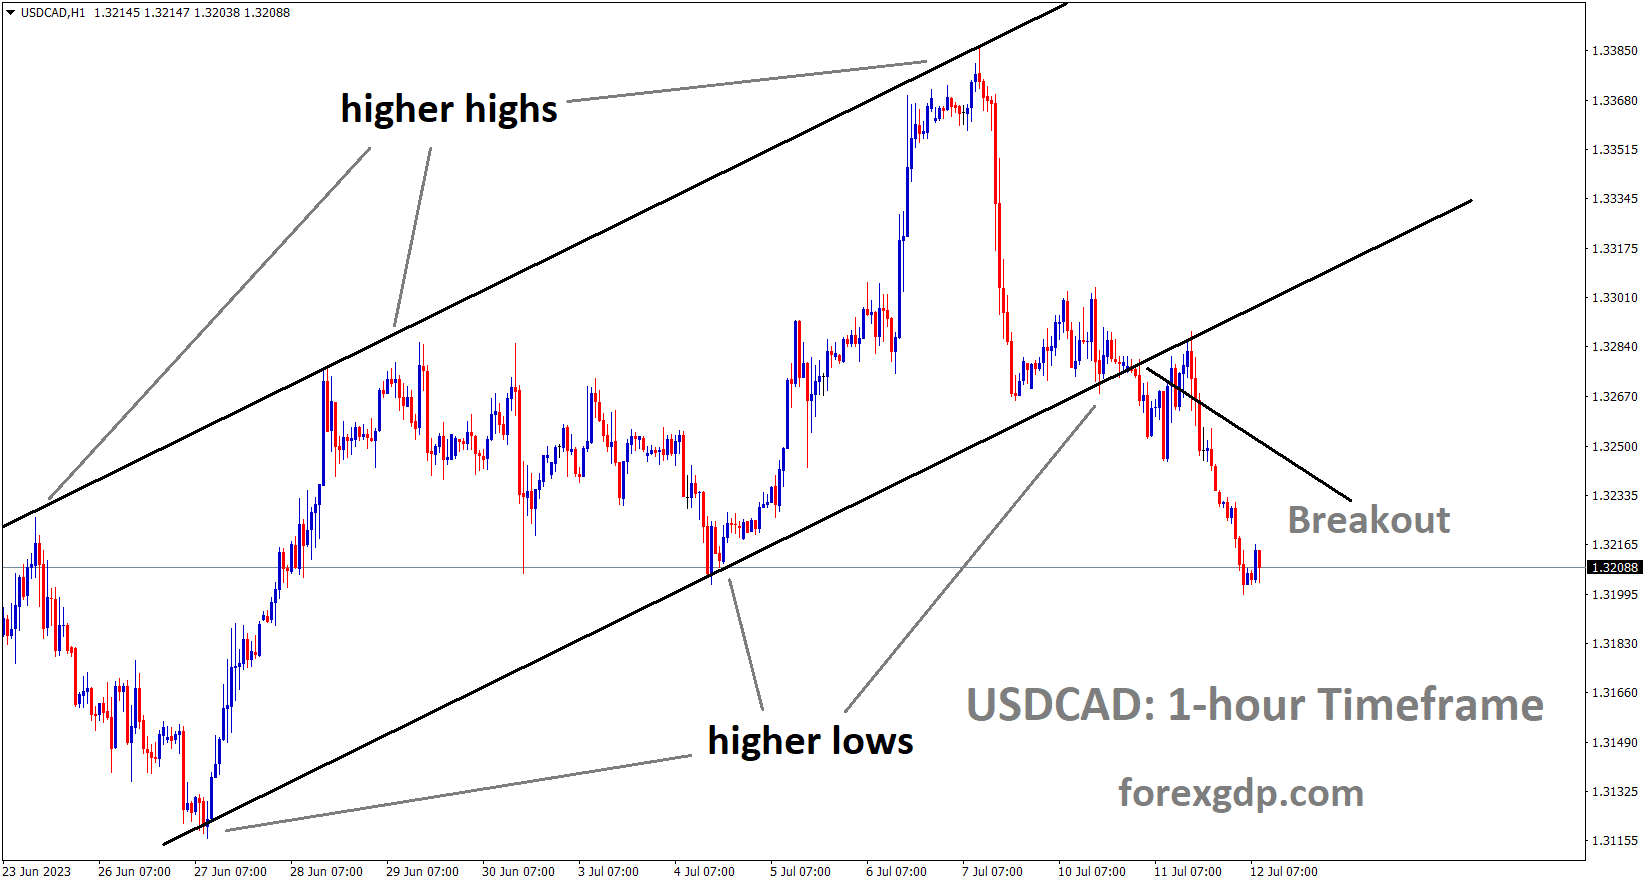 USDCAD H1 TF analysis Market has broken the Ascending channel in downside